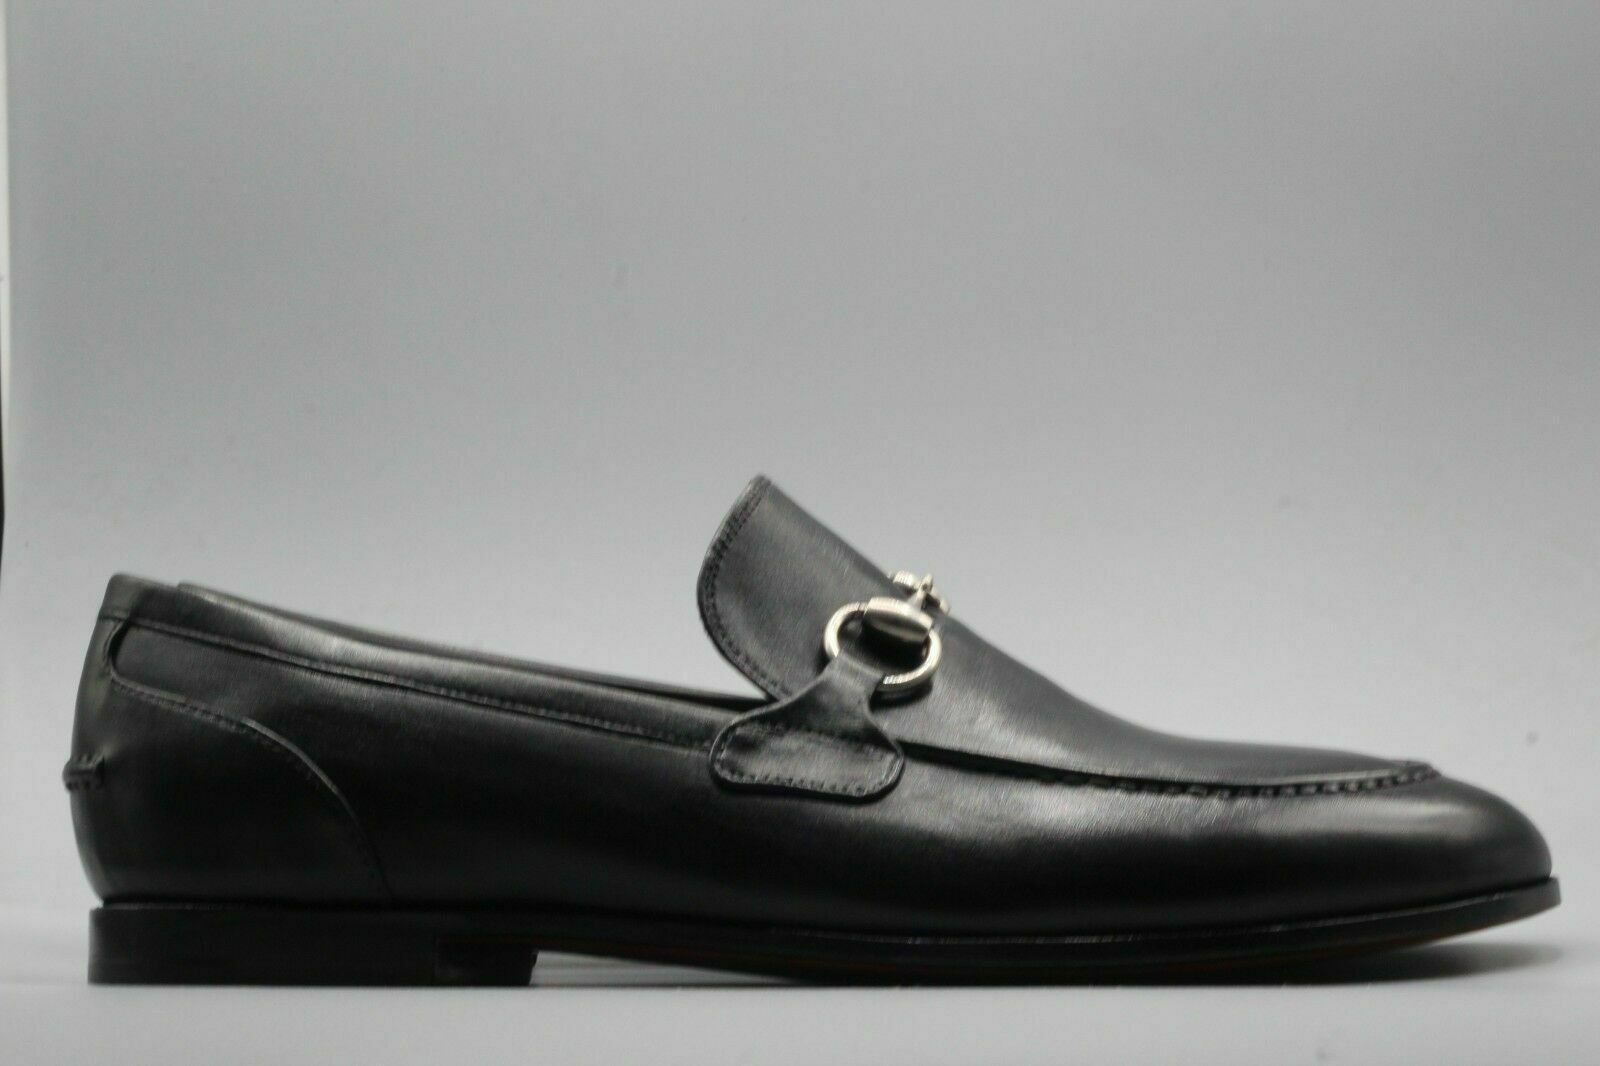 Mens Handmade Shoes Formal Wear Genuine Black Leather Moccasin Slip On Boots New 